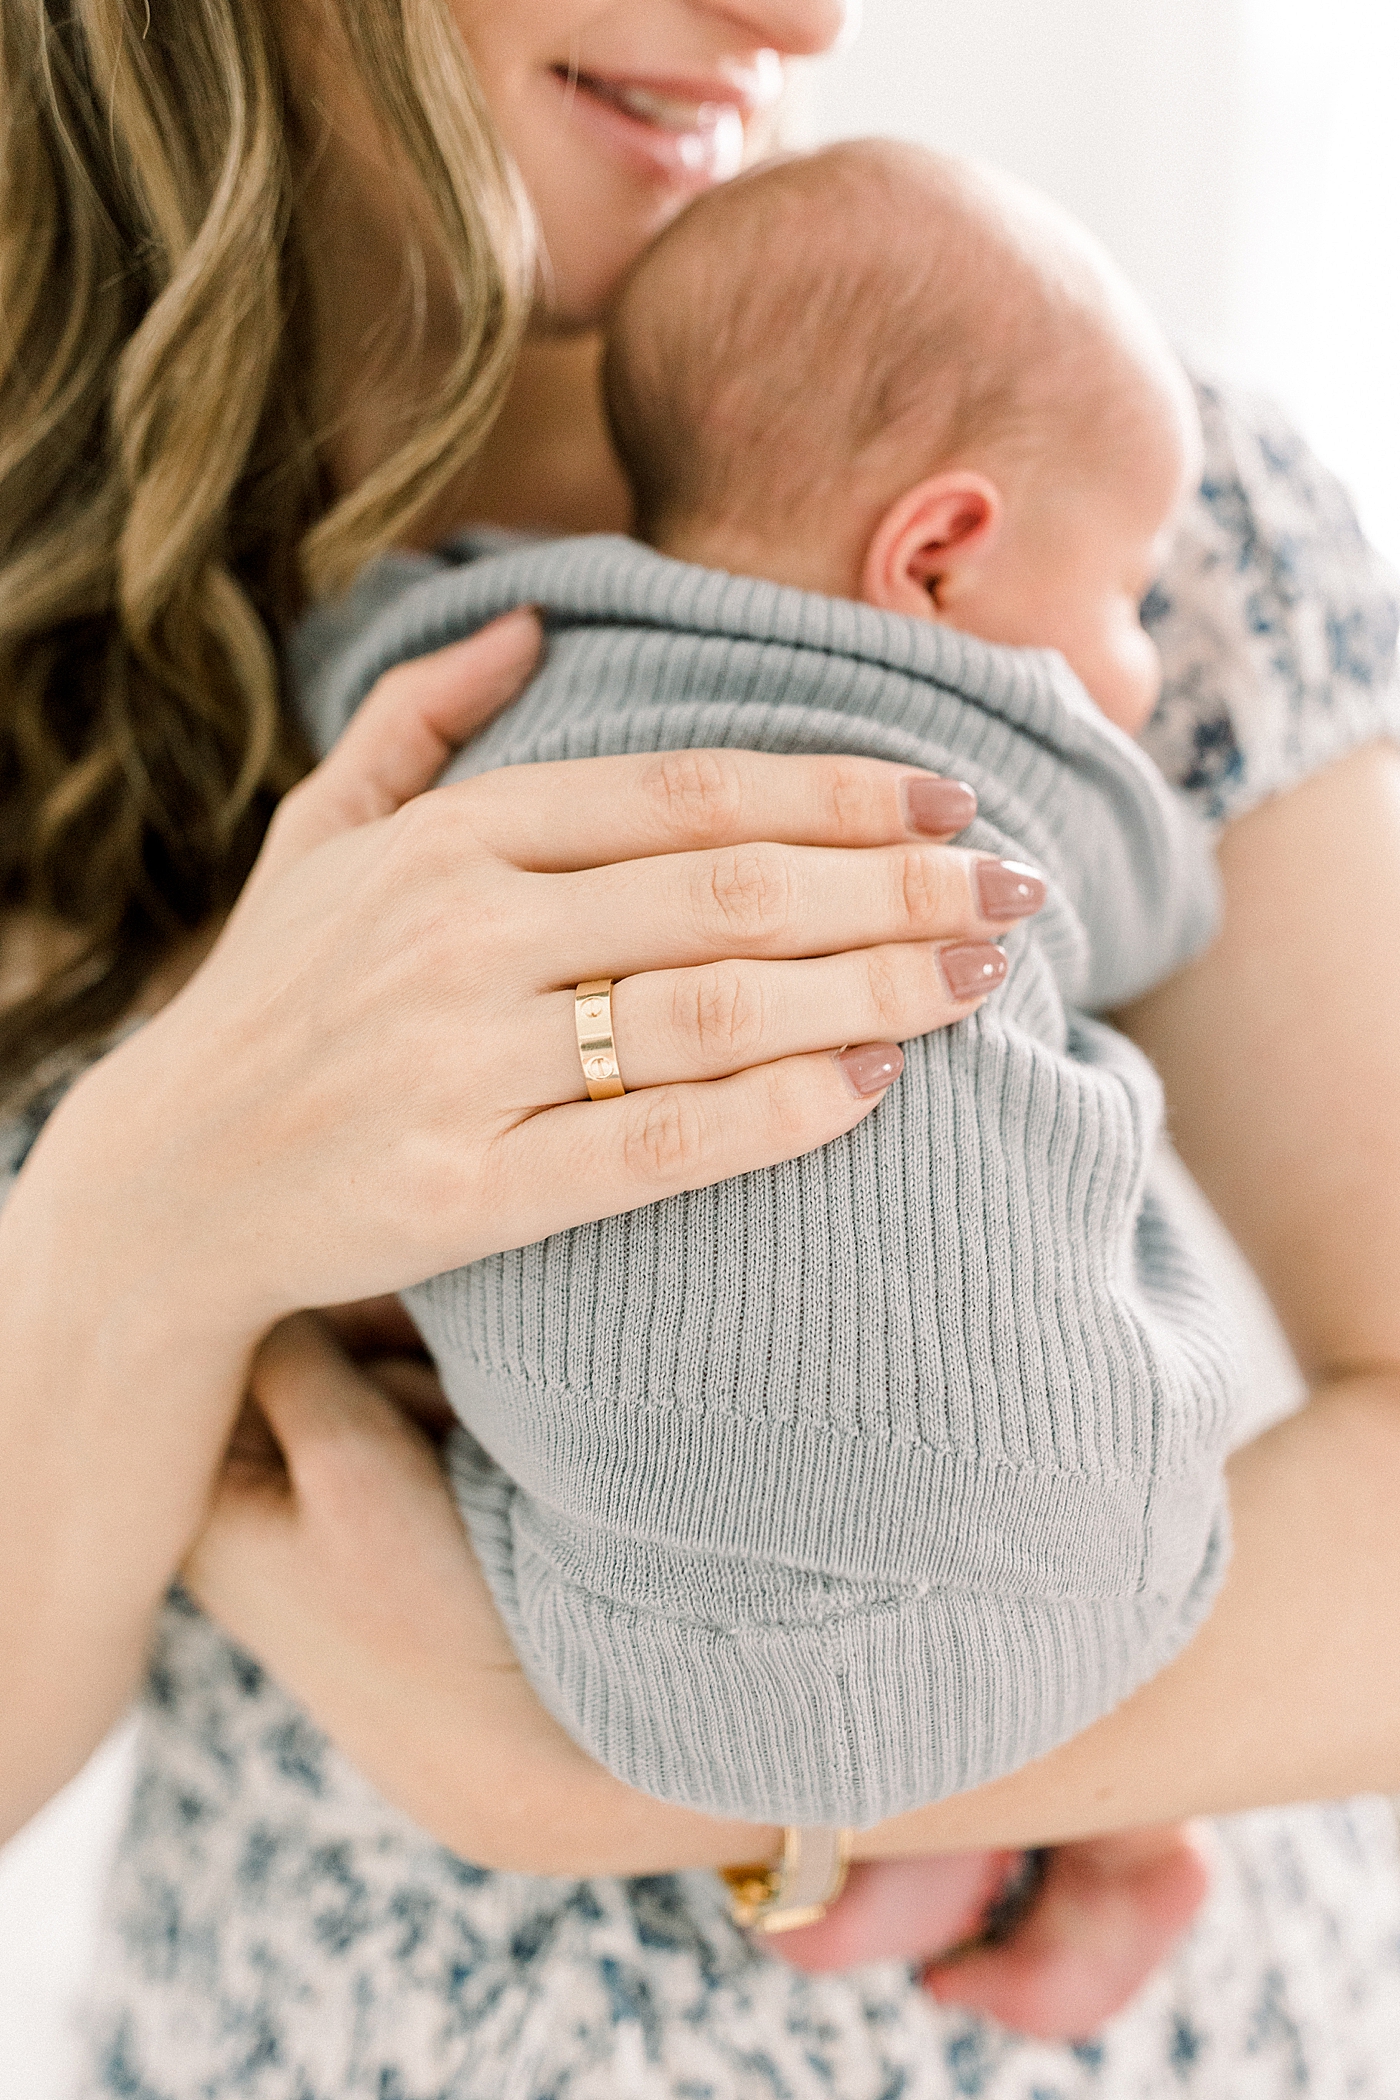 during their In-Home Lifestyle Newborn Session | Image by Caitlyn Motycka 